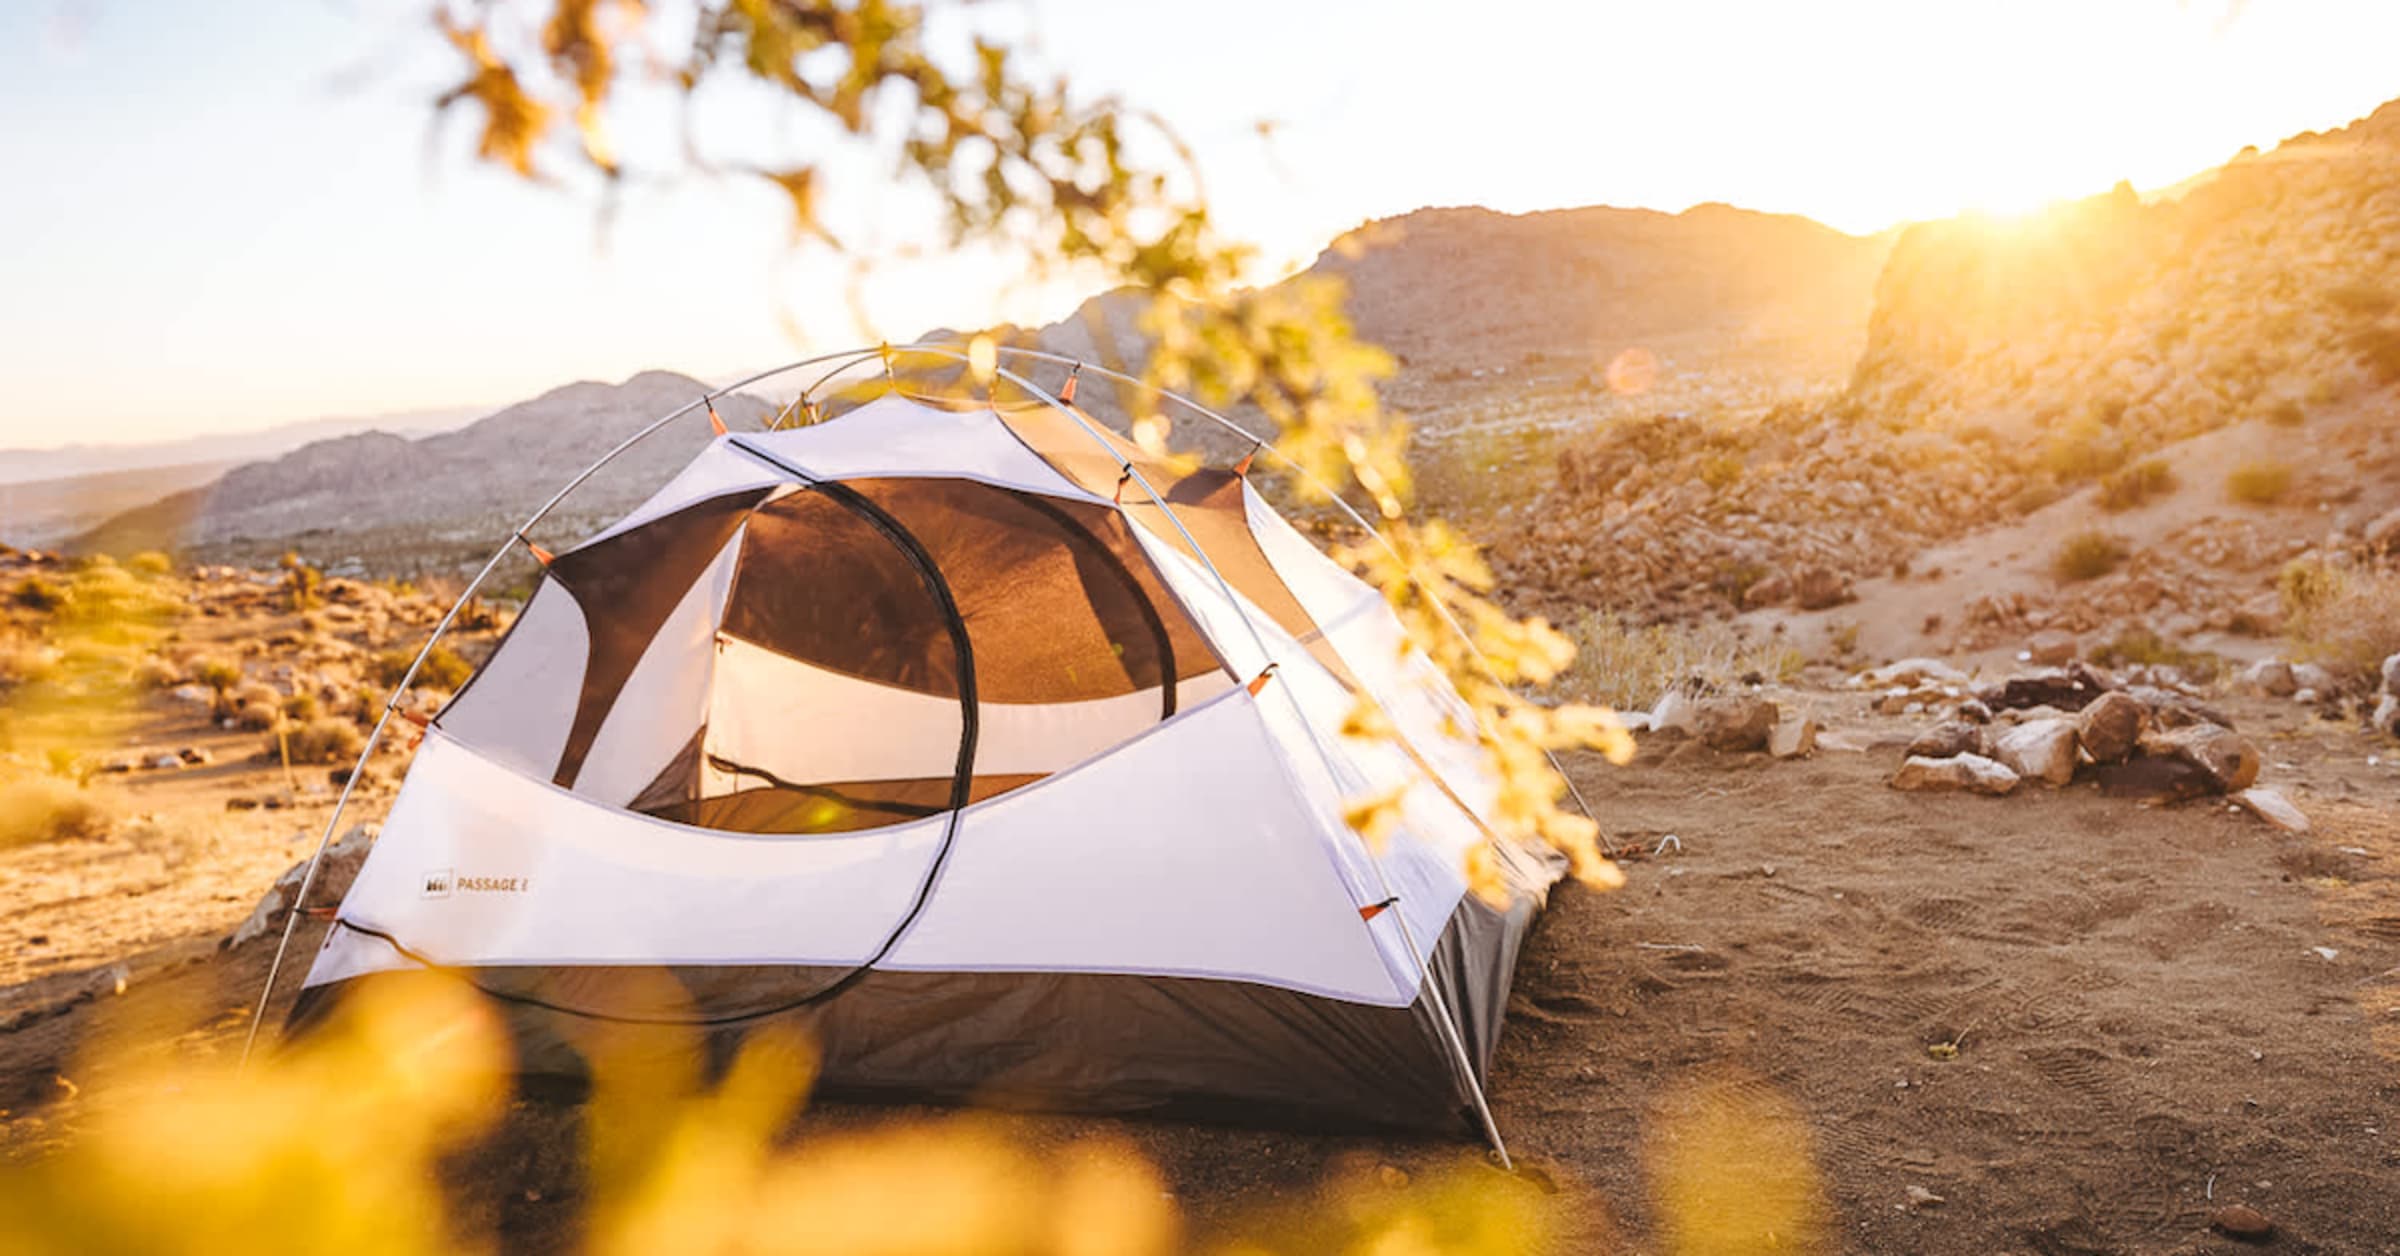 Where to pitch a tent